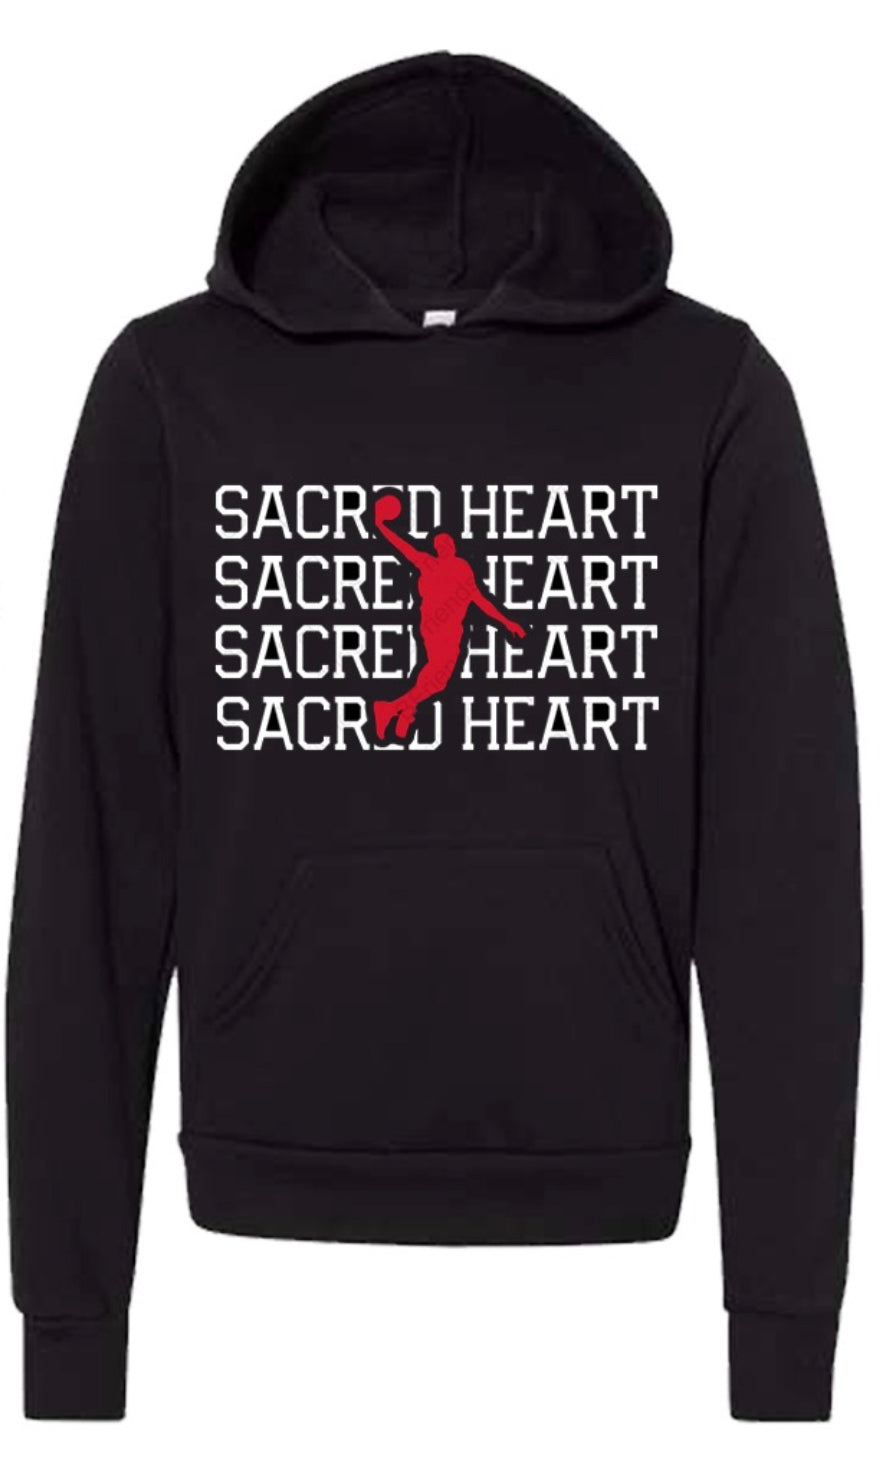 SACRED HEART Multi Sports Pullover Hoodie